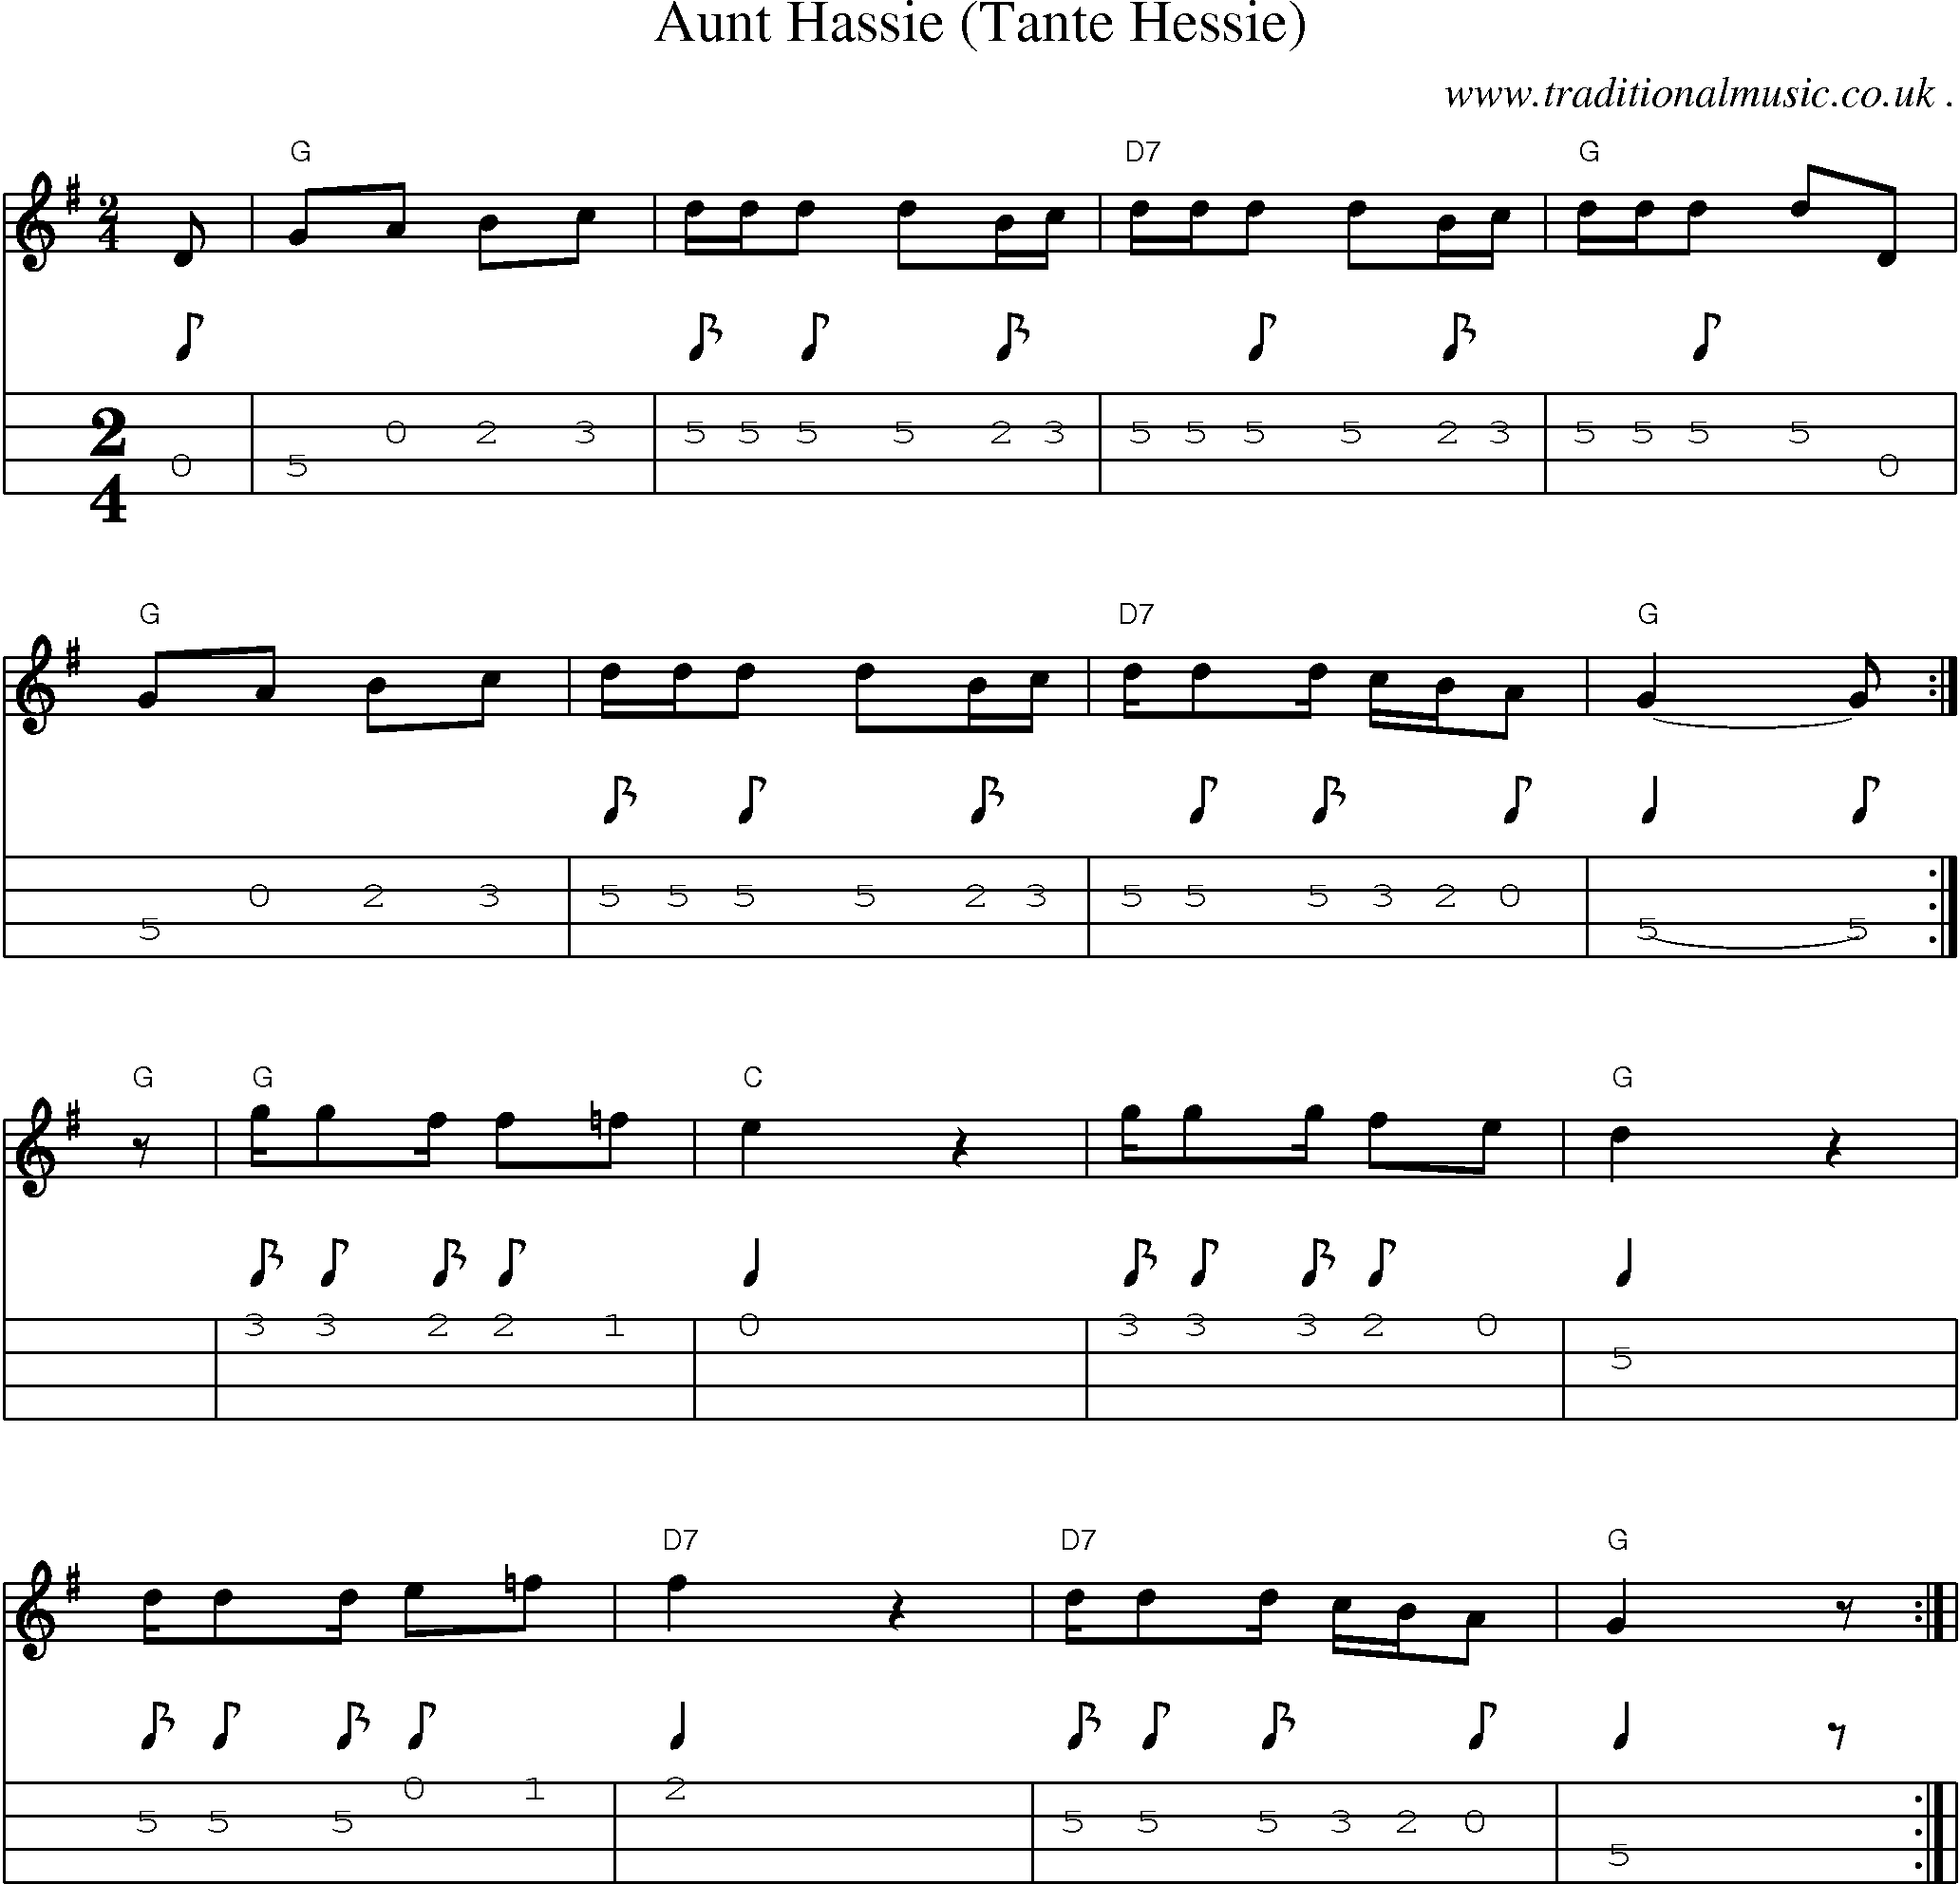 Music Score and Guitar Tabs for Aunt Hassie (tante Hessie)